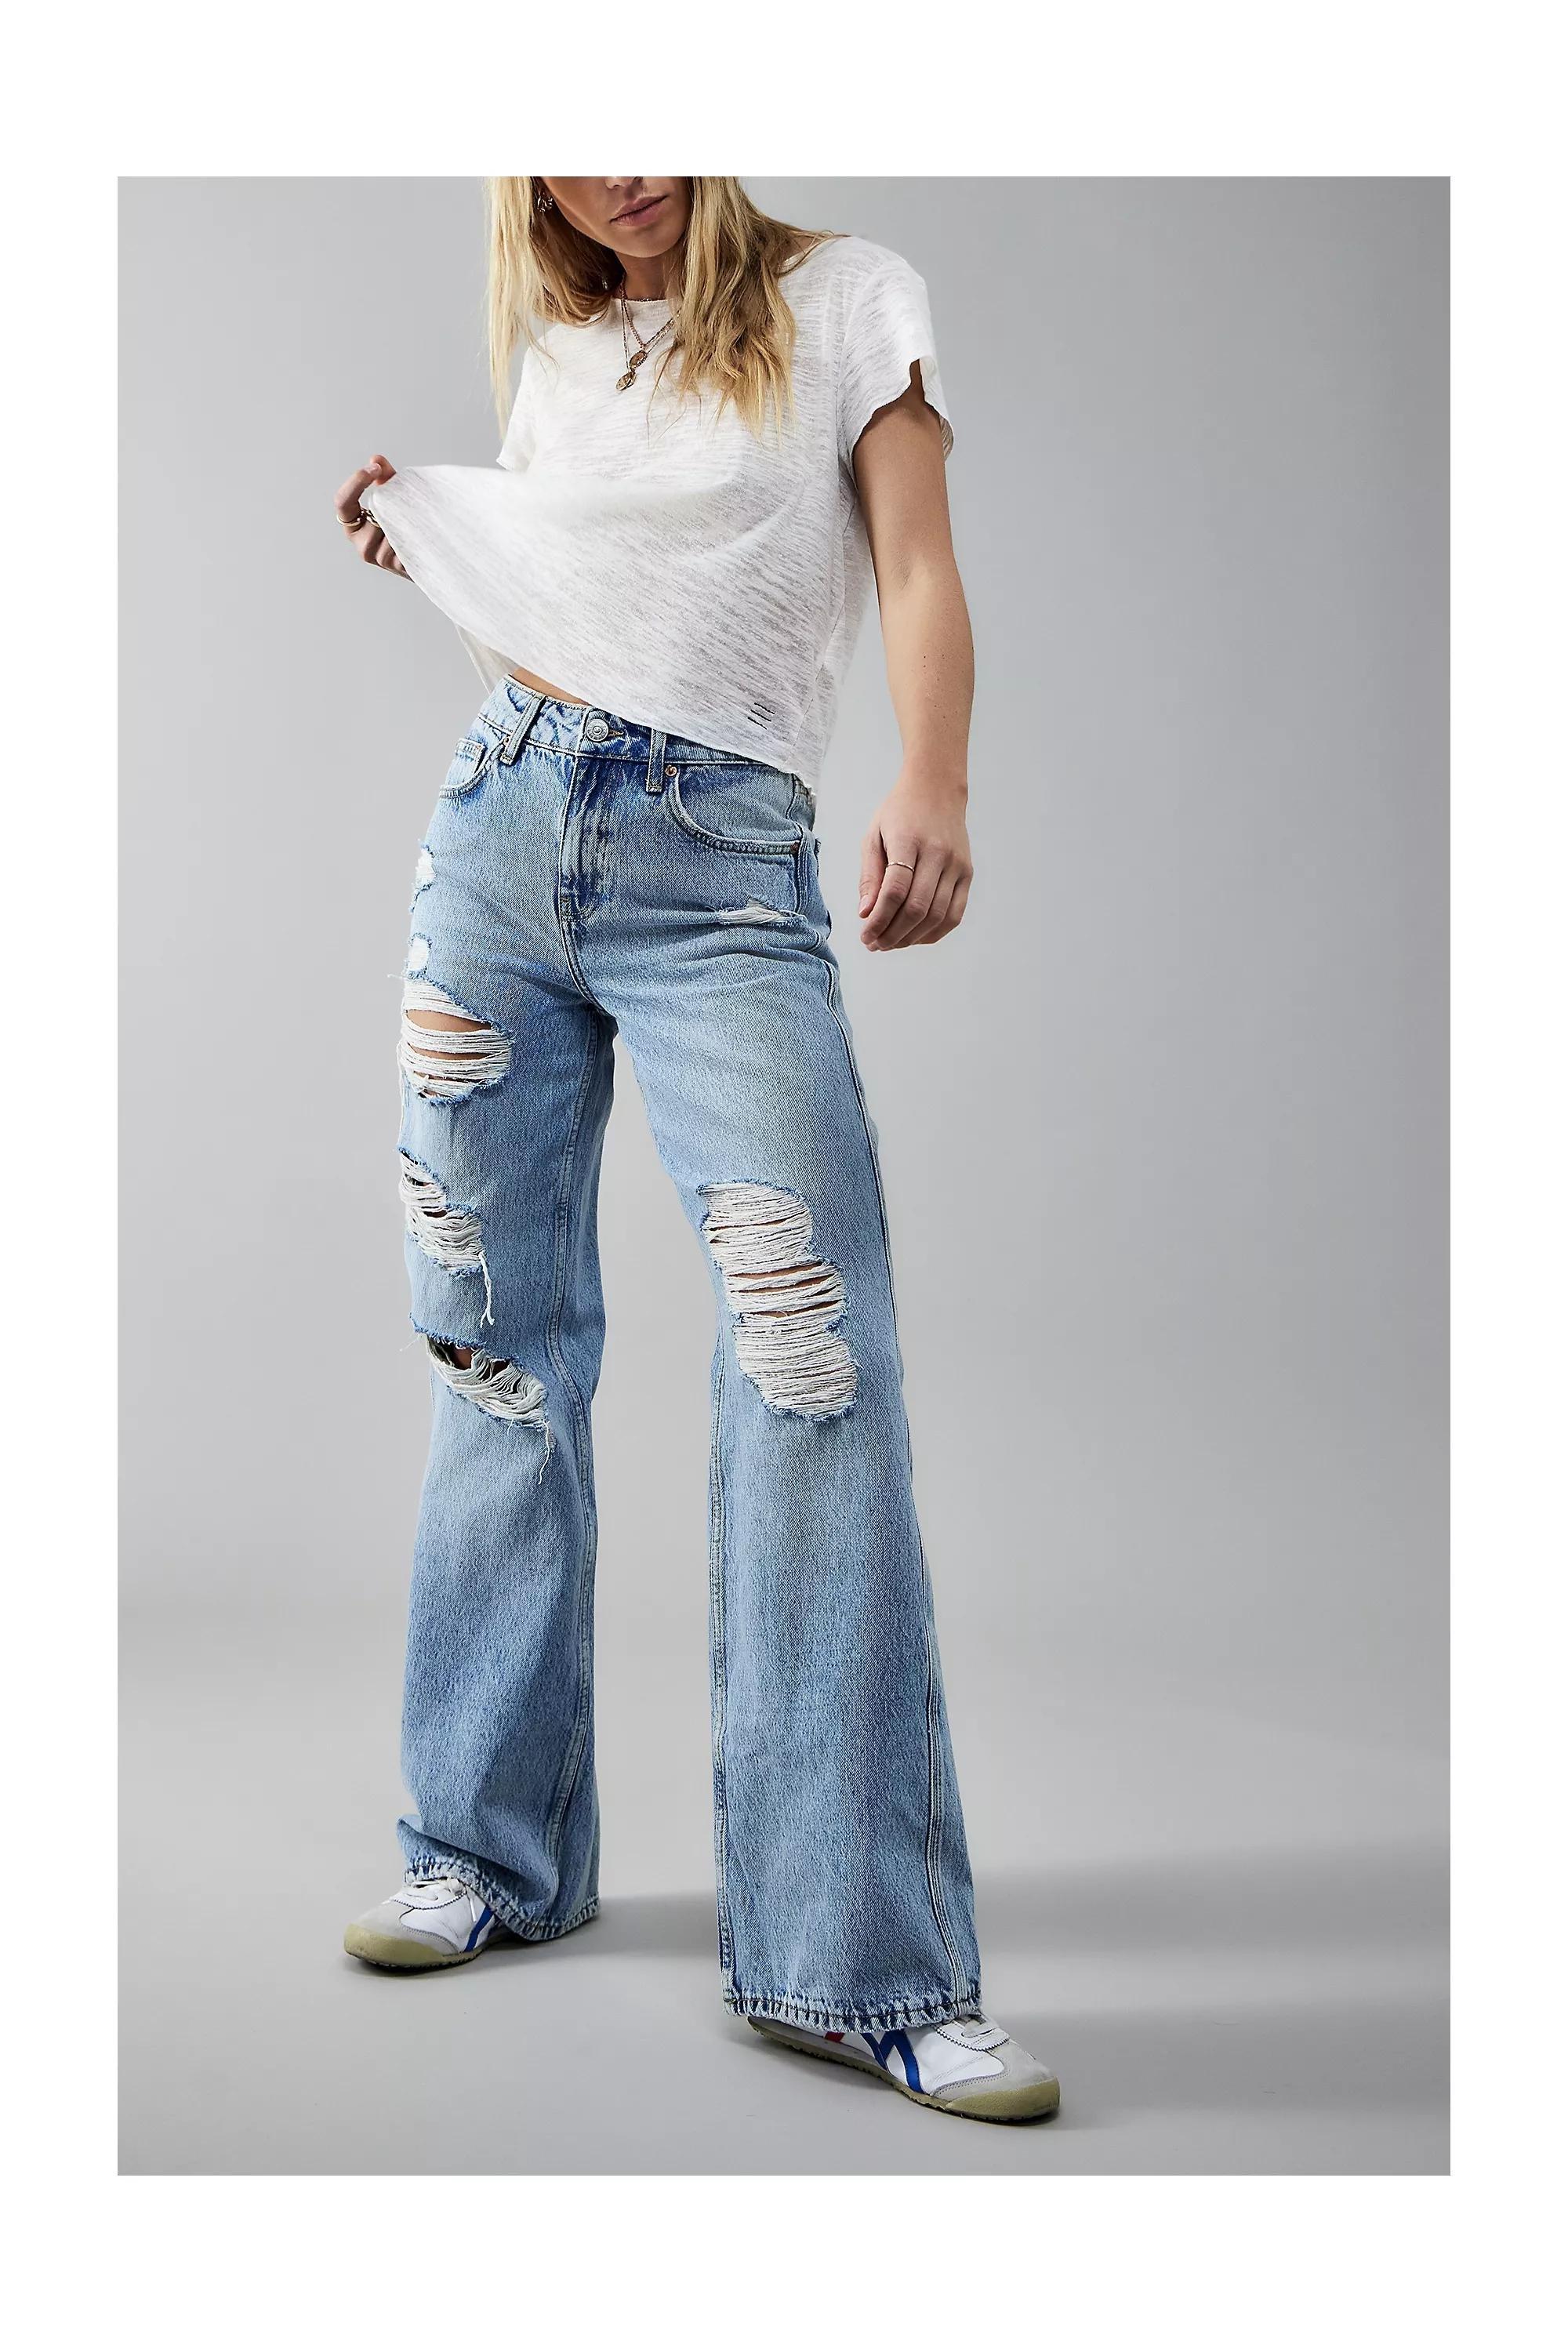 Women's BDG Urban Outfitters Ripped & Distressed Jeans